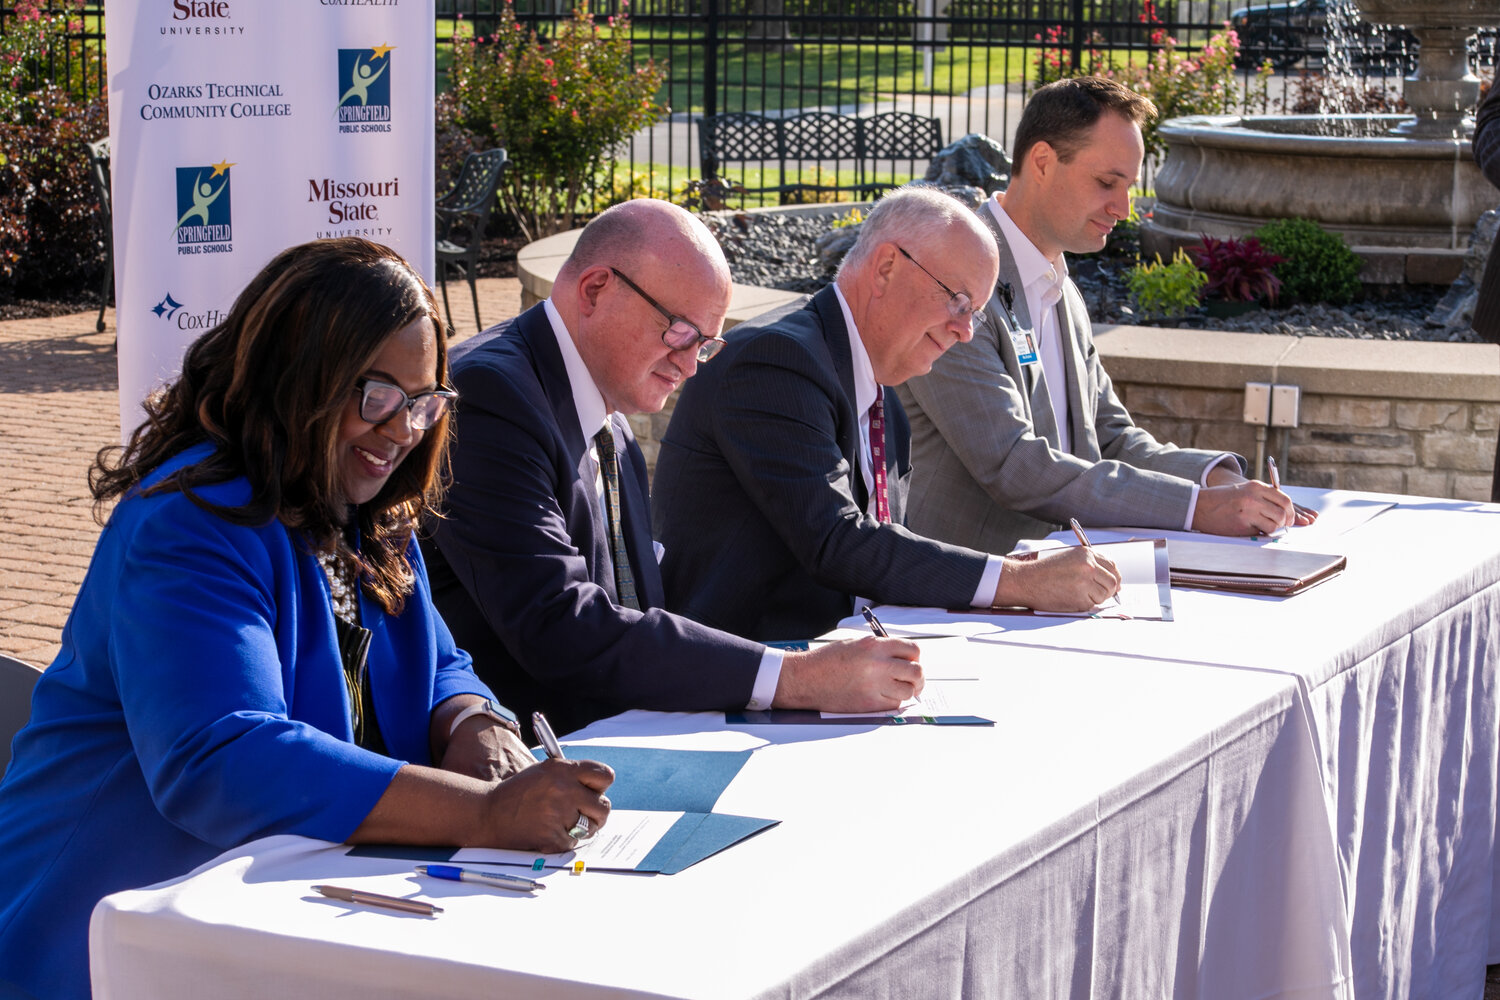 Signing an agreement to form the Alliance for Healthcare Education are, from left, Grenita Lathan, Springfield Public Schools; Hal Higdon, Ozarks Technical Community College; Clif Smart, Missouri State University; and Max Buetow, CoxHealth.